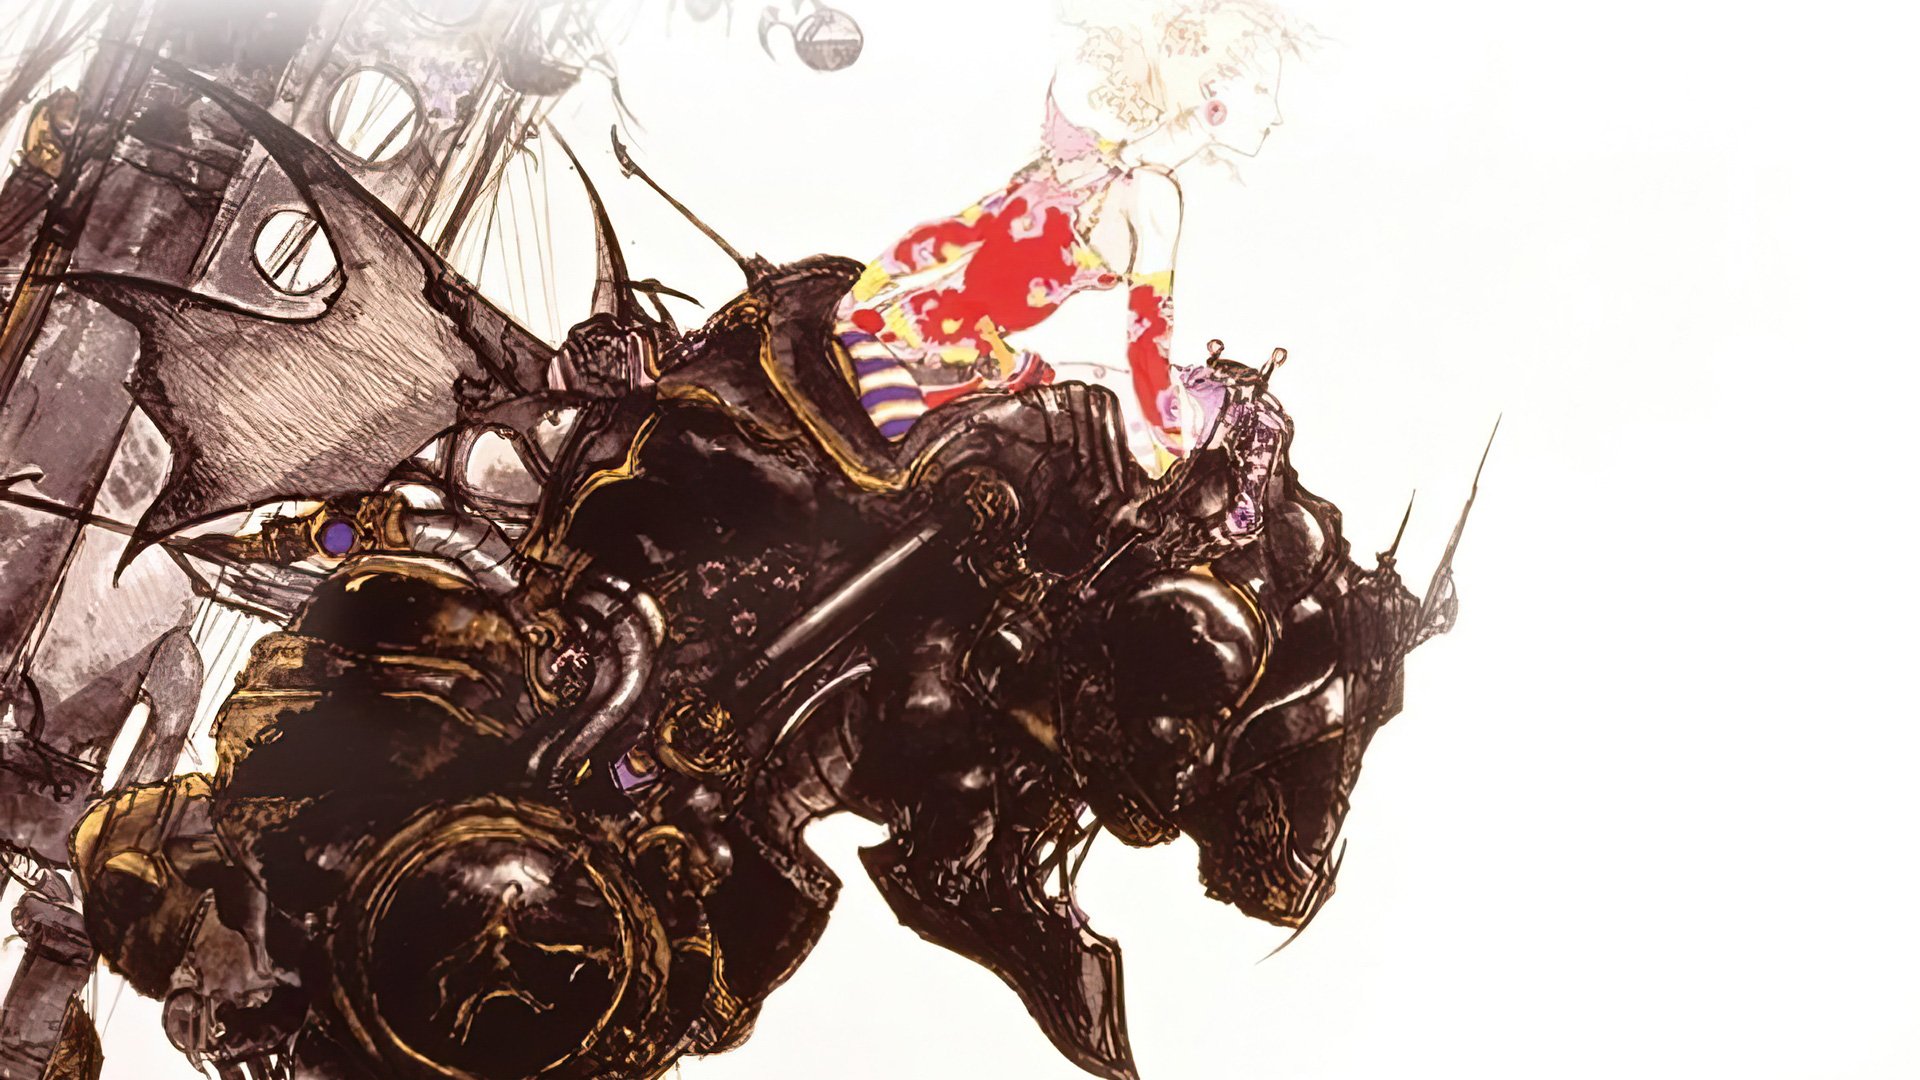 Producer hints at extended development period for highly anticipated Final Fantasy 6 remake